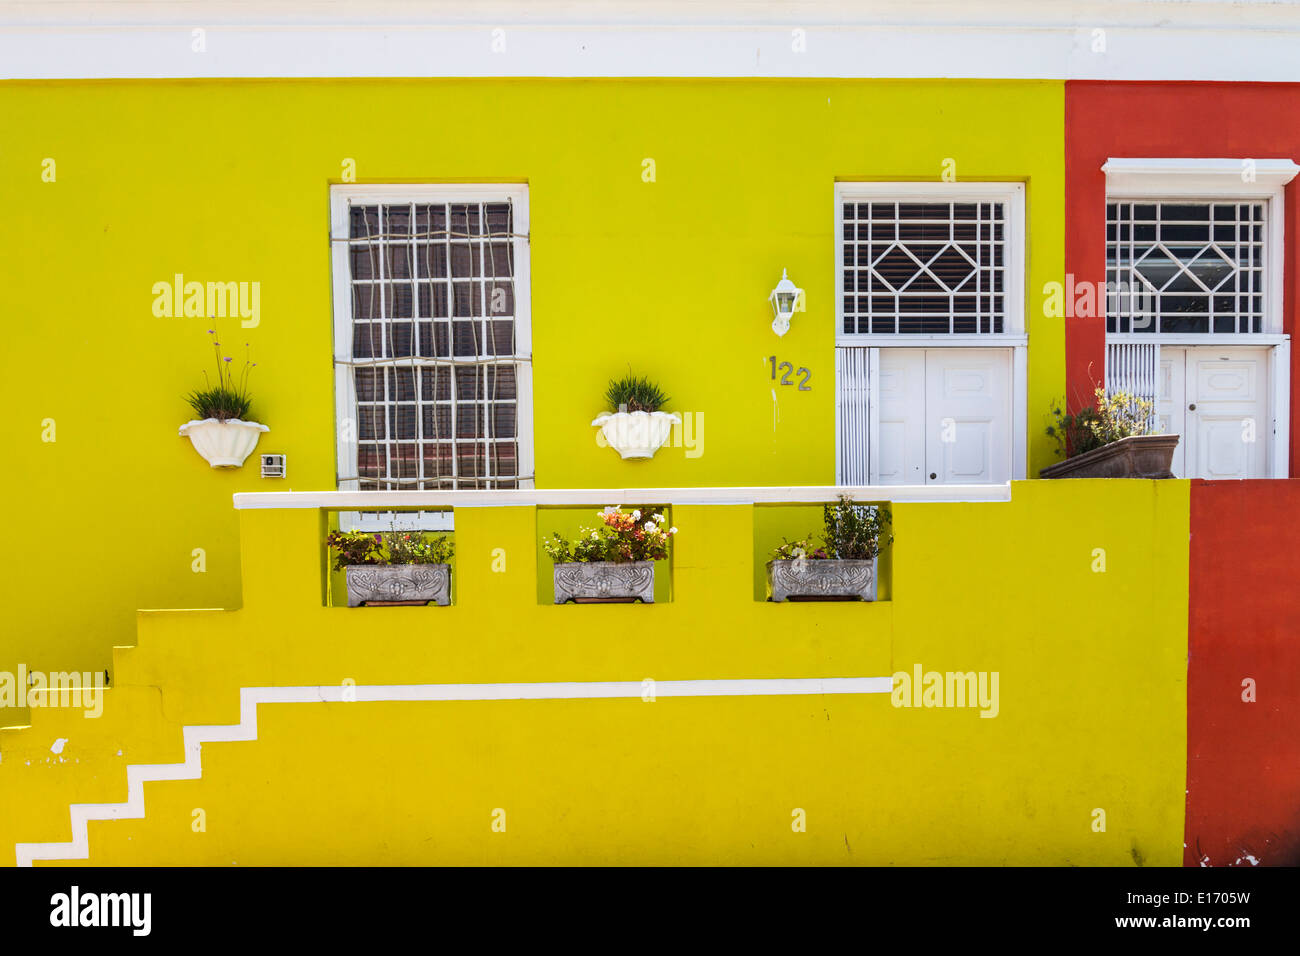 Bright yellow house in Chiappini street in the Bo Kaap district, Cape Malay Quarter, Cape Town, South Africa Stock Photo